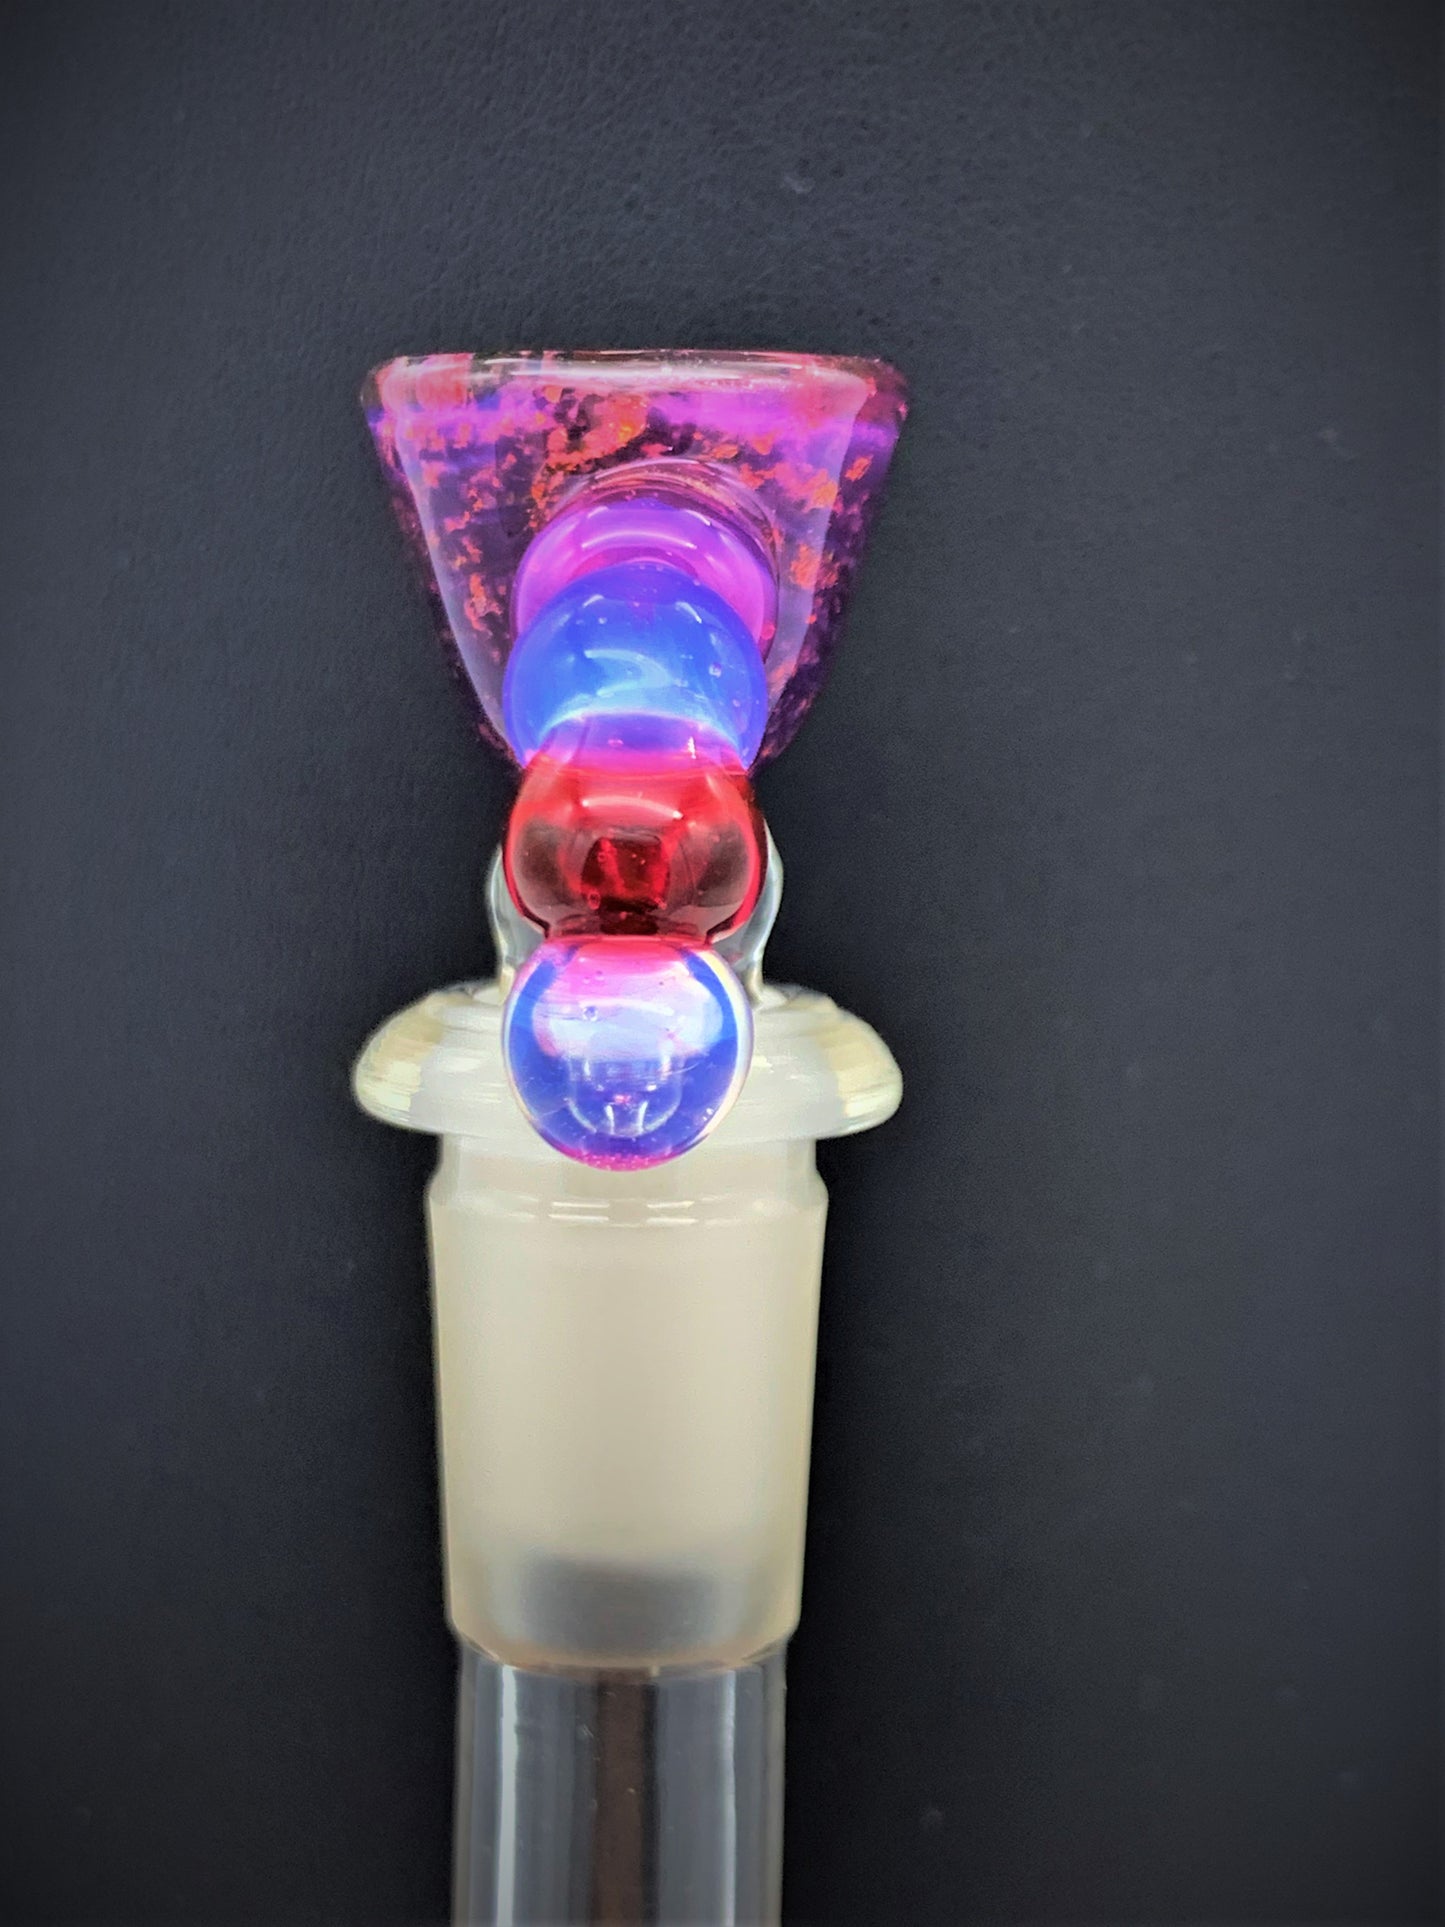 Space Galaxy Themed Karmaline over Crushed Opal with Opal 14mm Bowl / Slide